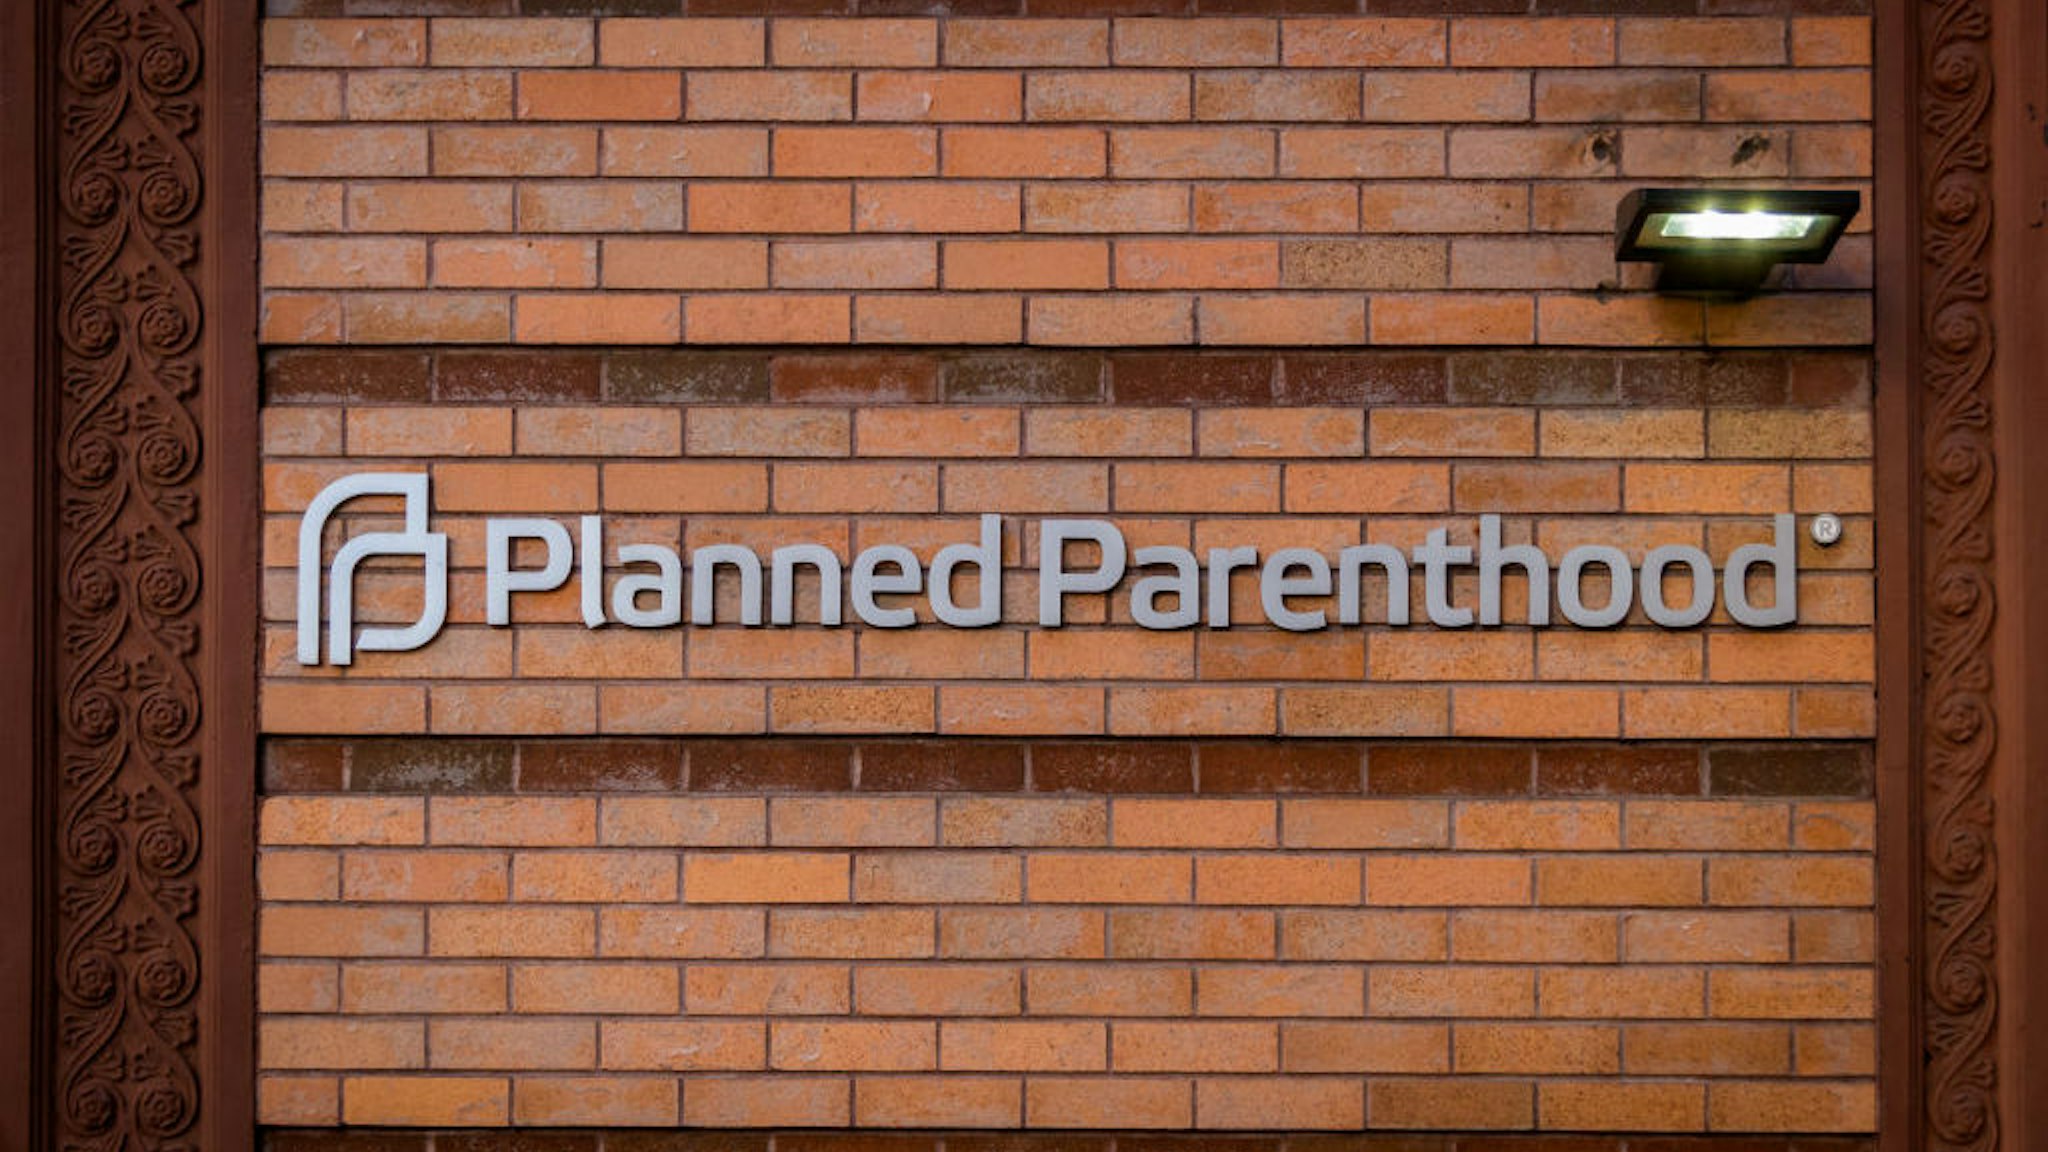 Planned Parenthood offices in SoHo. (Photo by Erik McGregor). (Photo by Erik McGregor/LightRocket via Getty Images)